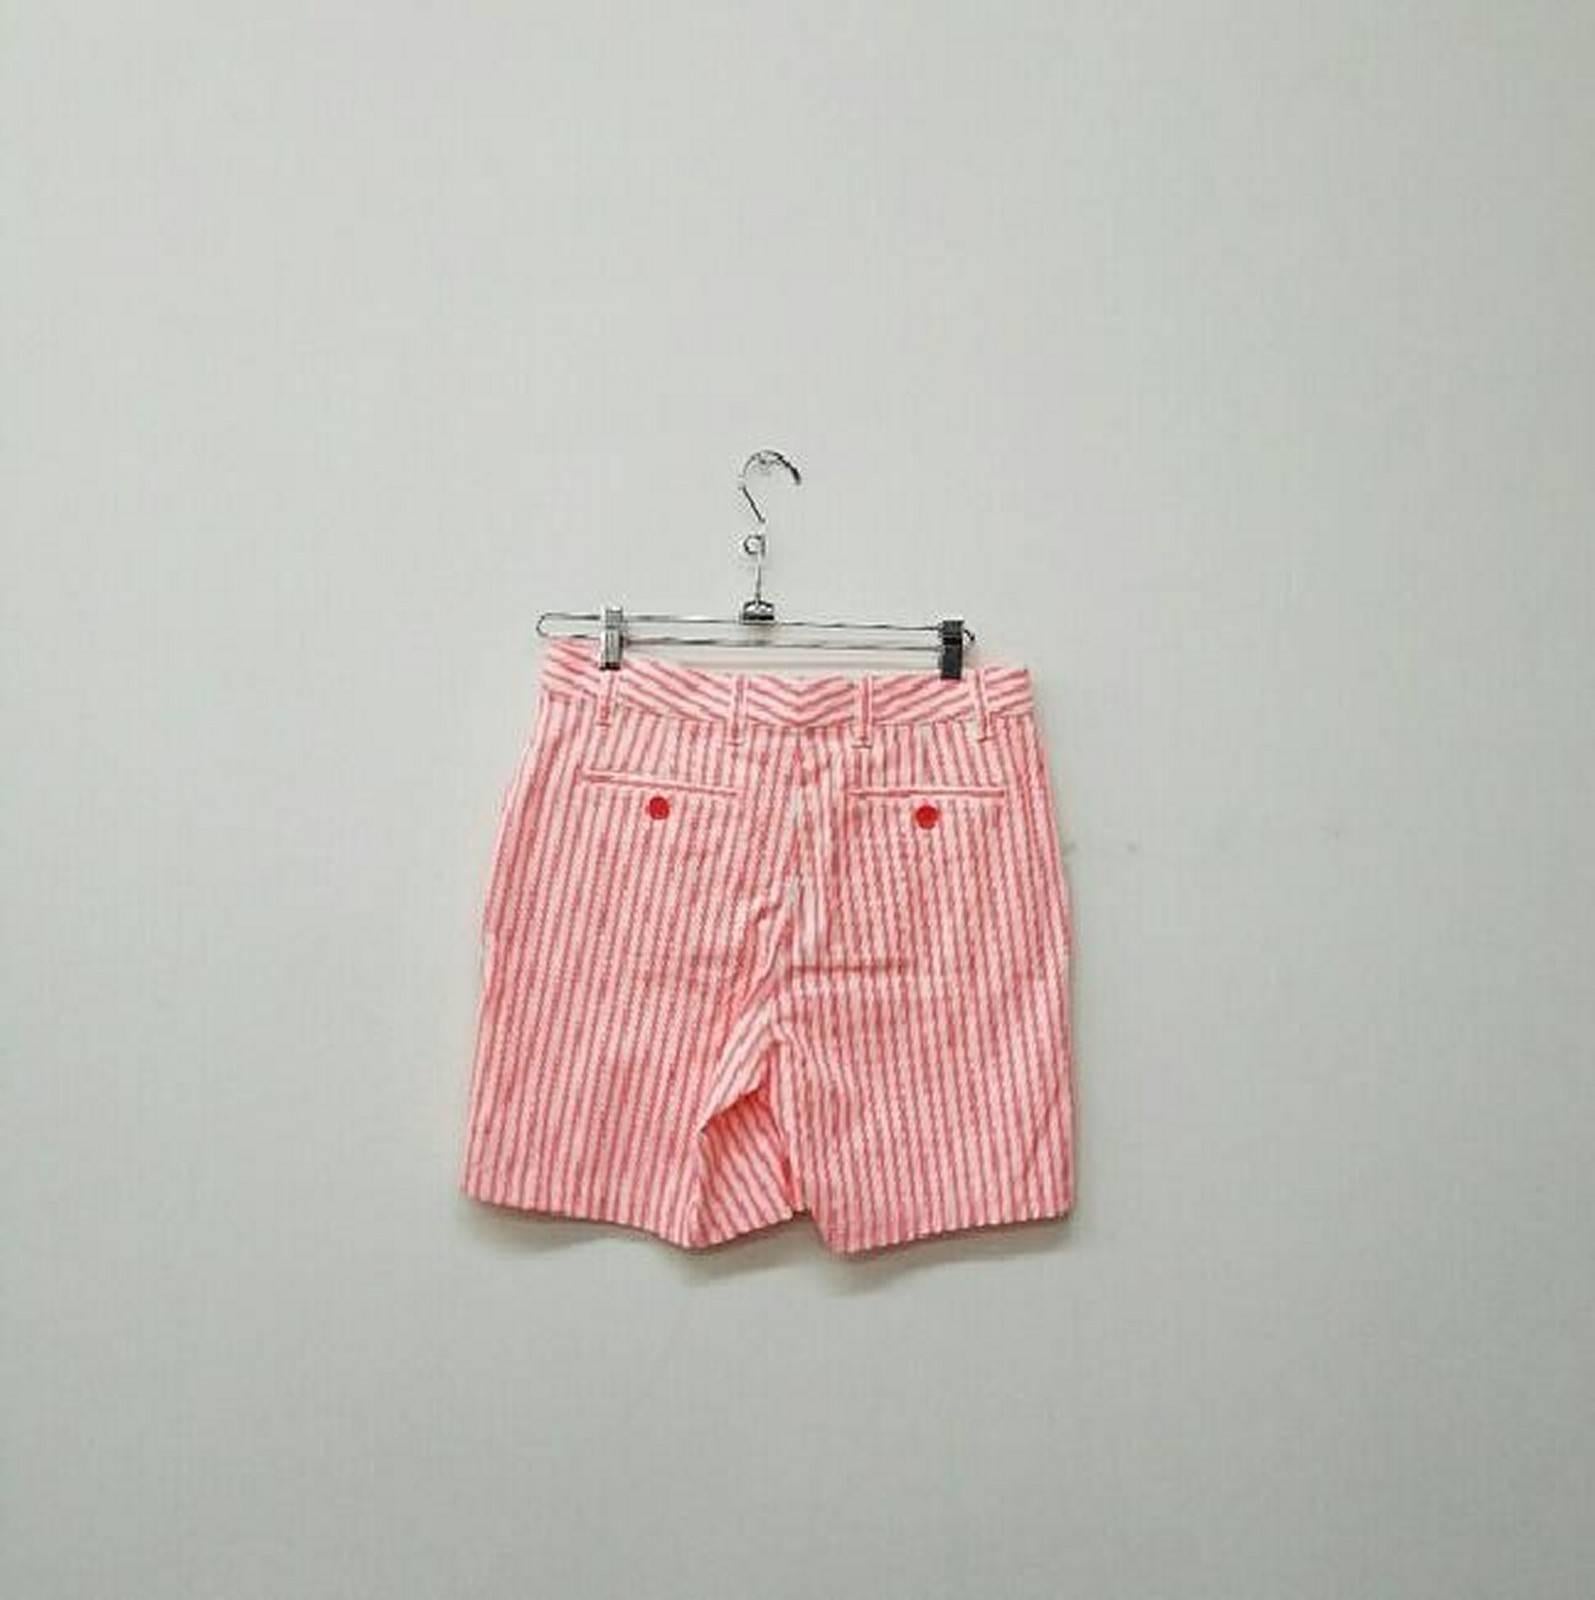 Brown Marc by Marc Jacobs Striped Shorts - Size: 6 (S, 28) For Sale